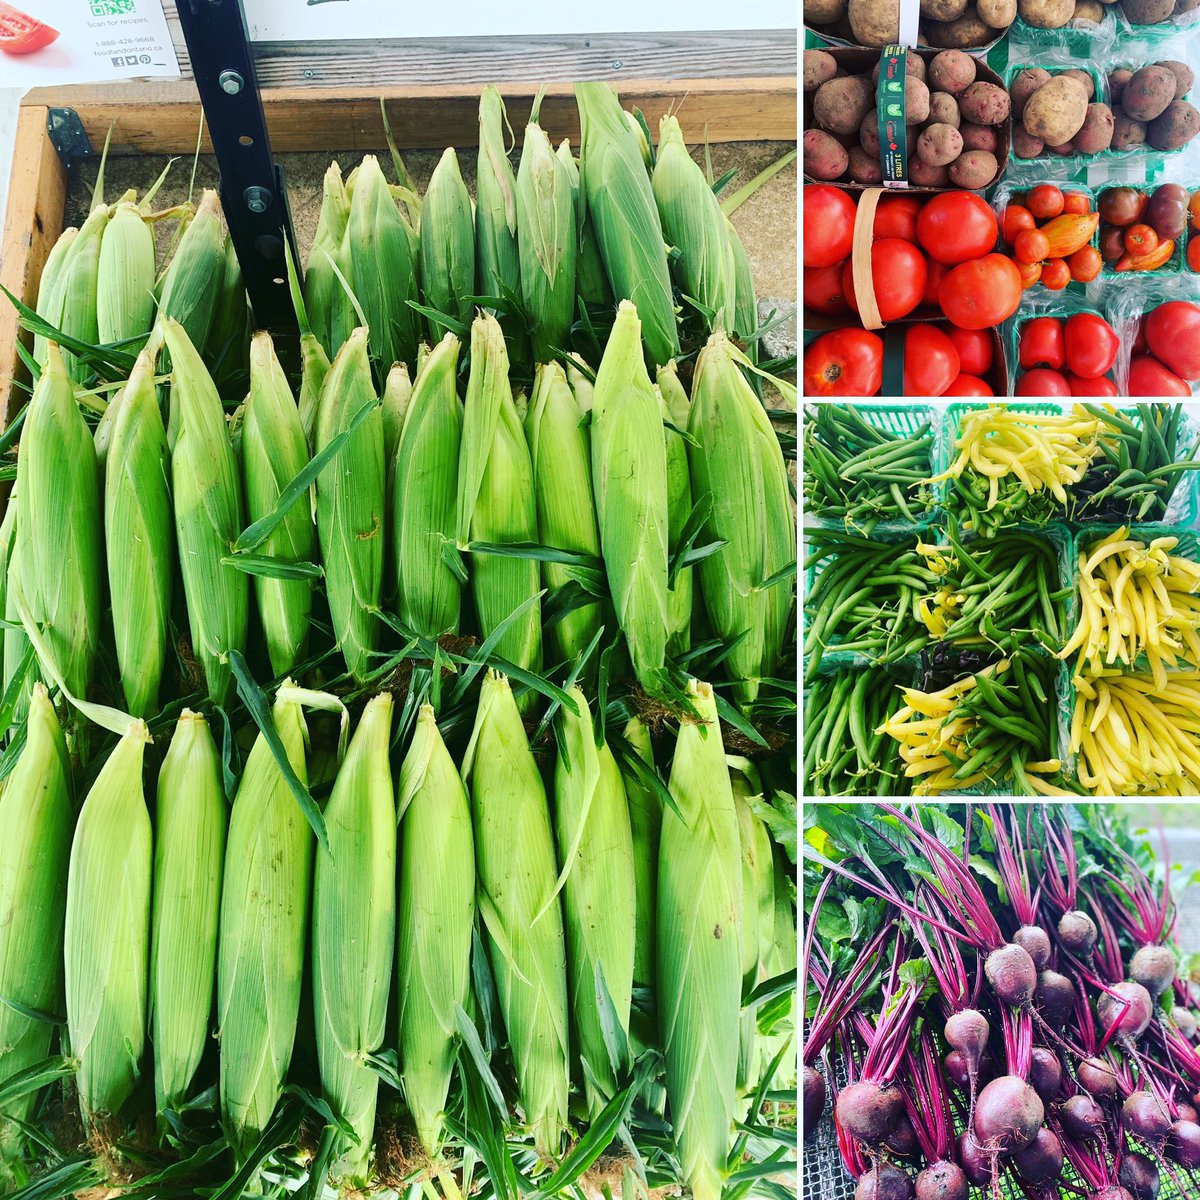 All the colours of the #rainbow 🌈 are available today at #indianriveracres farm market stand! Open till 6pm everyday
#getitwhileyoucan #homegrown #handpicked #veggies #eatyourgreens #halfyourplate #foodlandontario #summers #localfood #lovelocalptbo